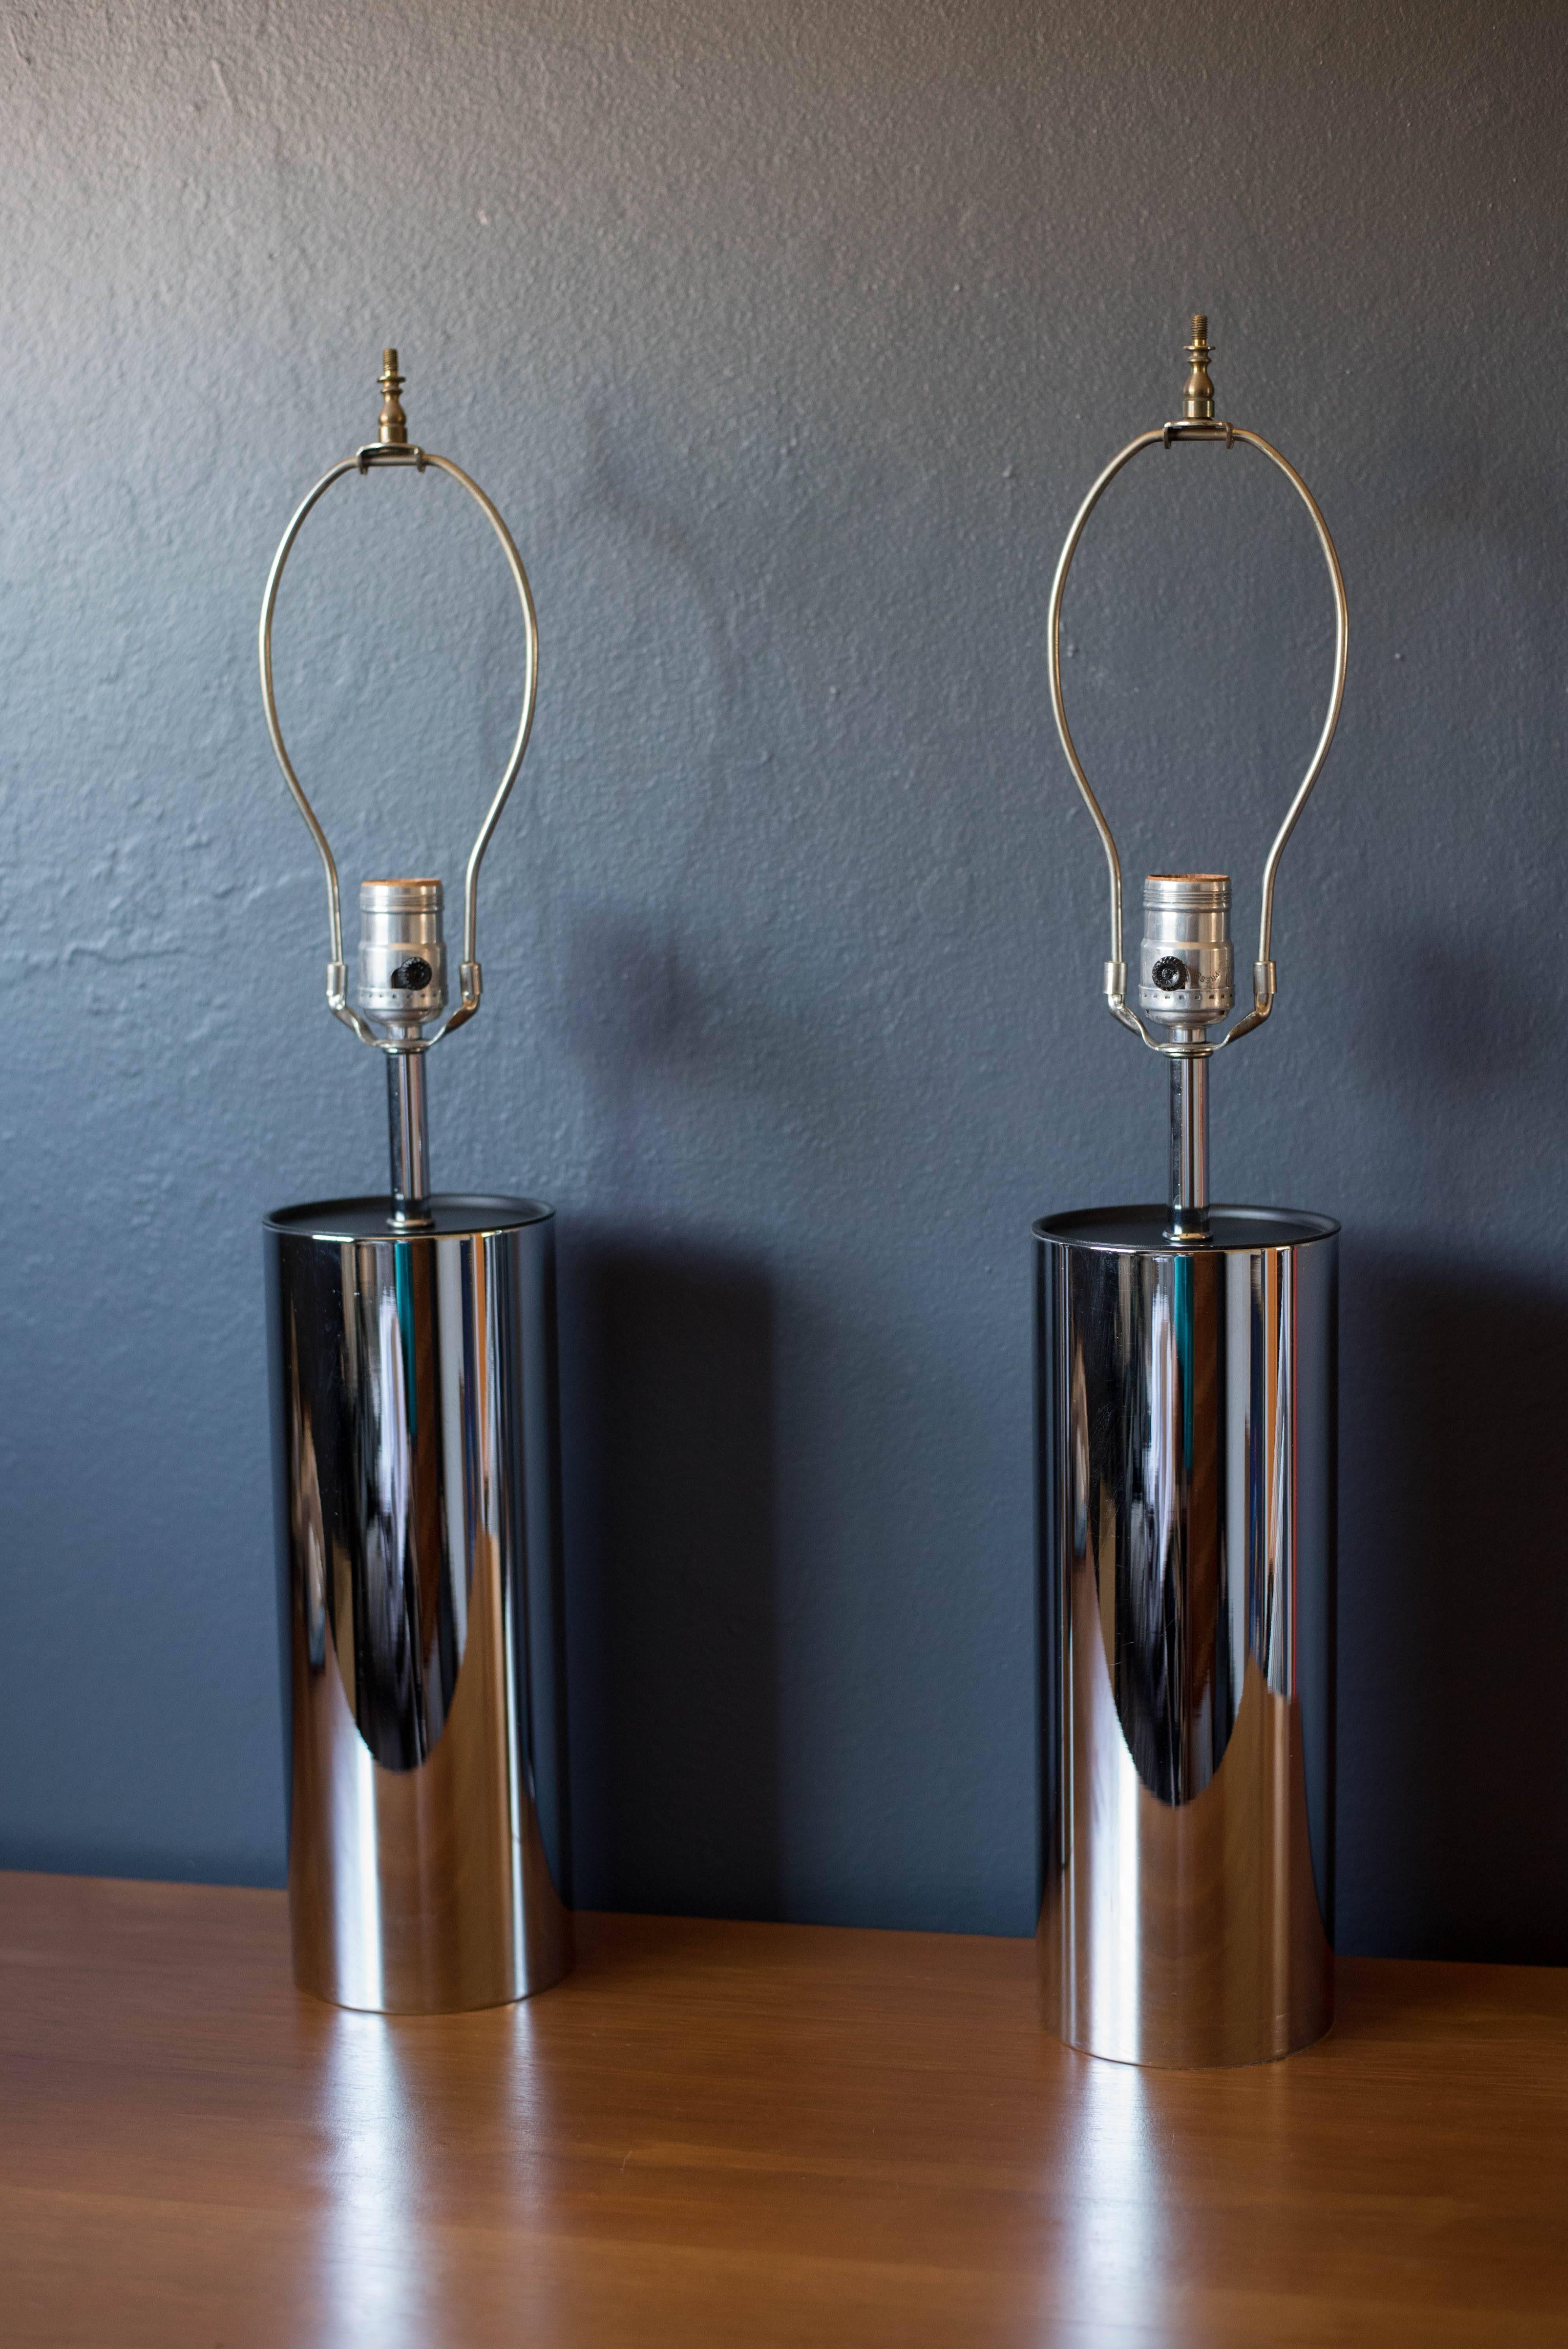 Pair of tall chrome lamps by George Kovacs, 1970s. This set is cylinder shaped and includes a three way switch mechanism. Shades are not included. Price is for the pair.